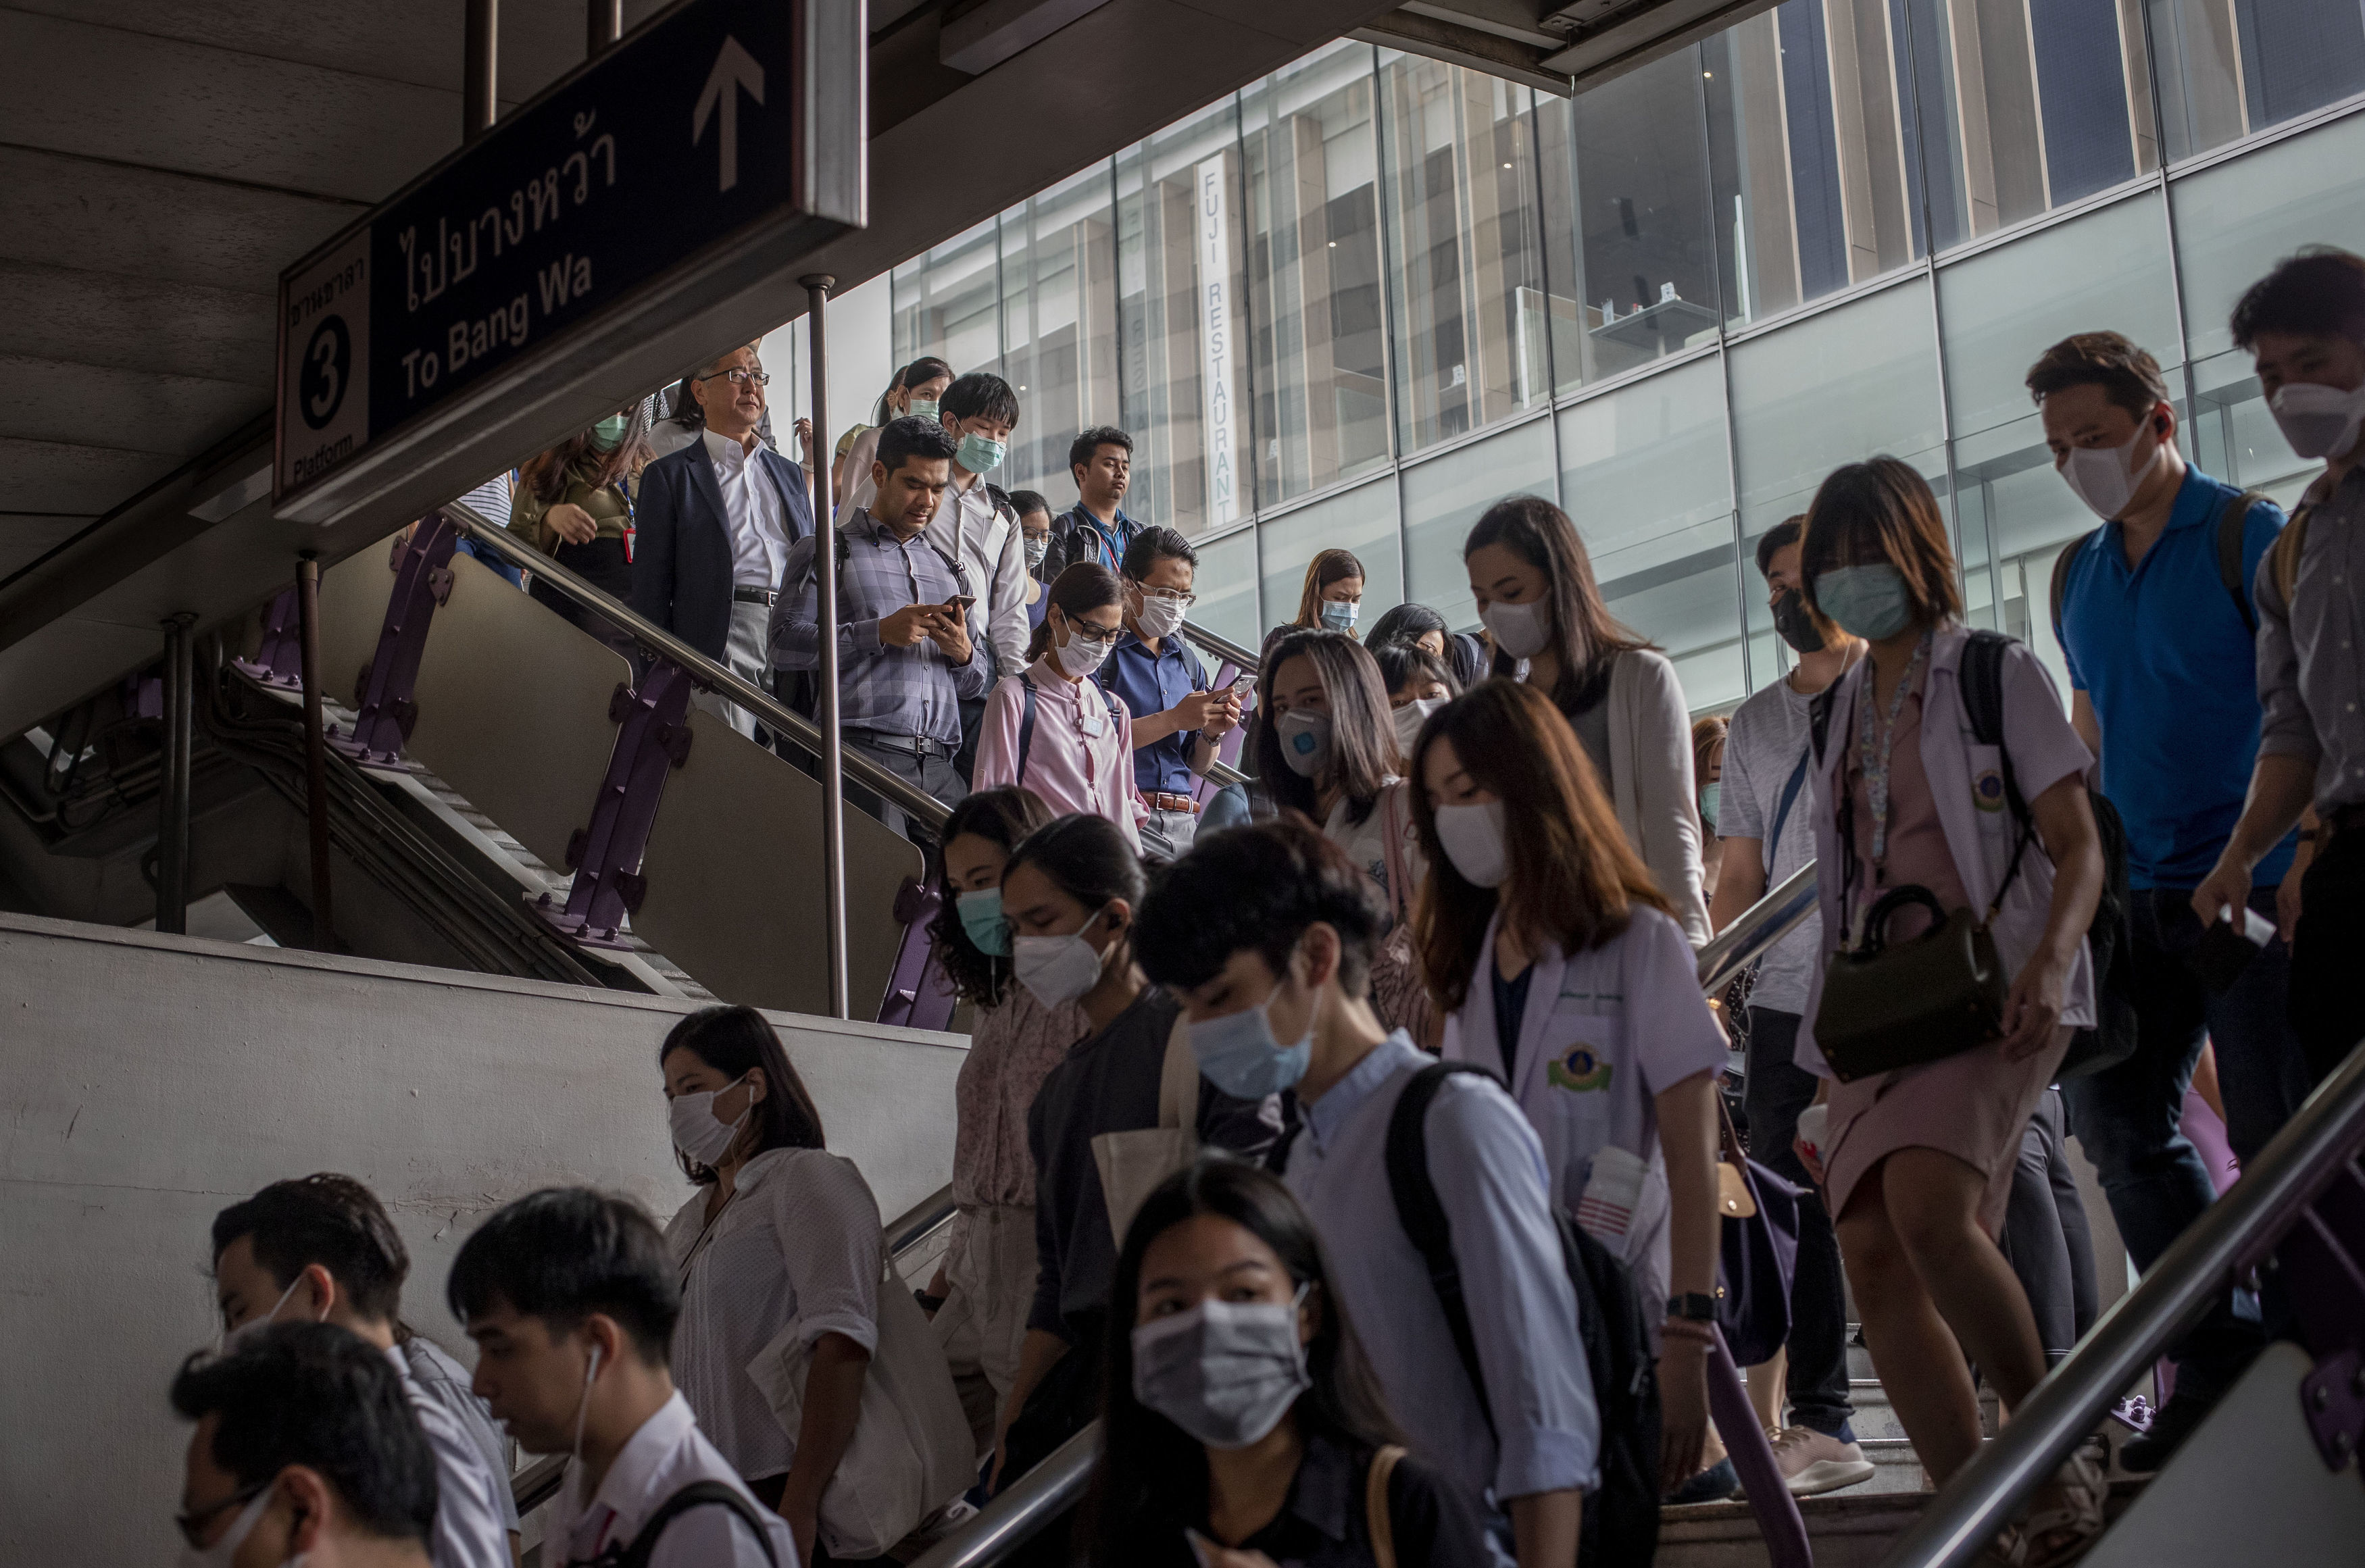 Commuters wear face masks to protect themselves from air pollution and the spreading coronavirus in Bangkok, Thailand, Tuesday, Feb. 4, 2020. On Tuesday, the Korea Centers for Disease Control and Prevention said a 42-year-old South Korean woman tested positive for the virus, days after she returned from a trip to Thailand with chills and other symptoms. (AP Photo/Gemunu Amarasinghe). (27075766)